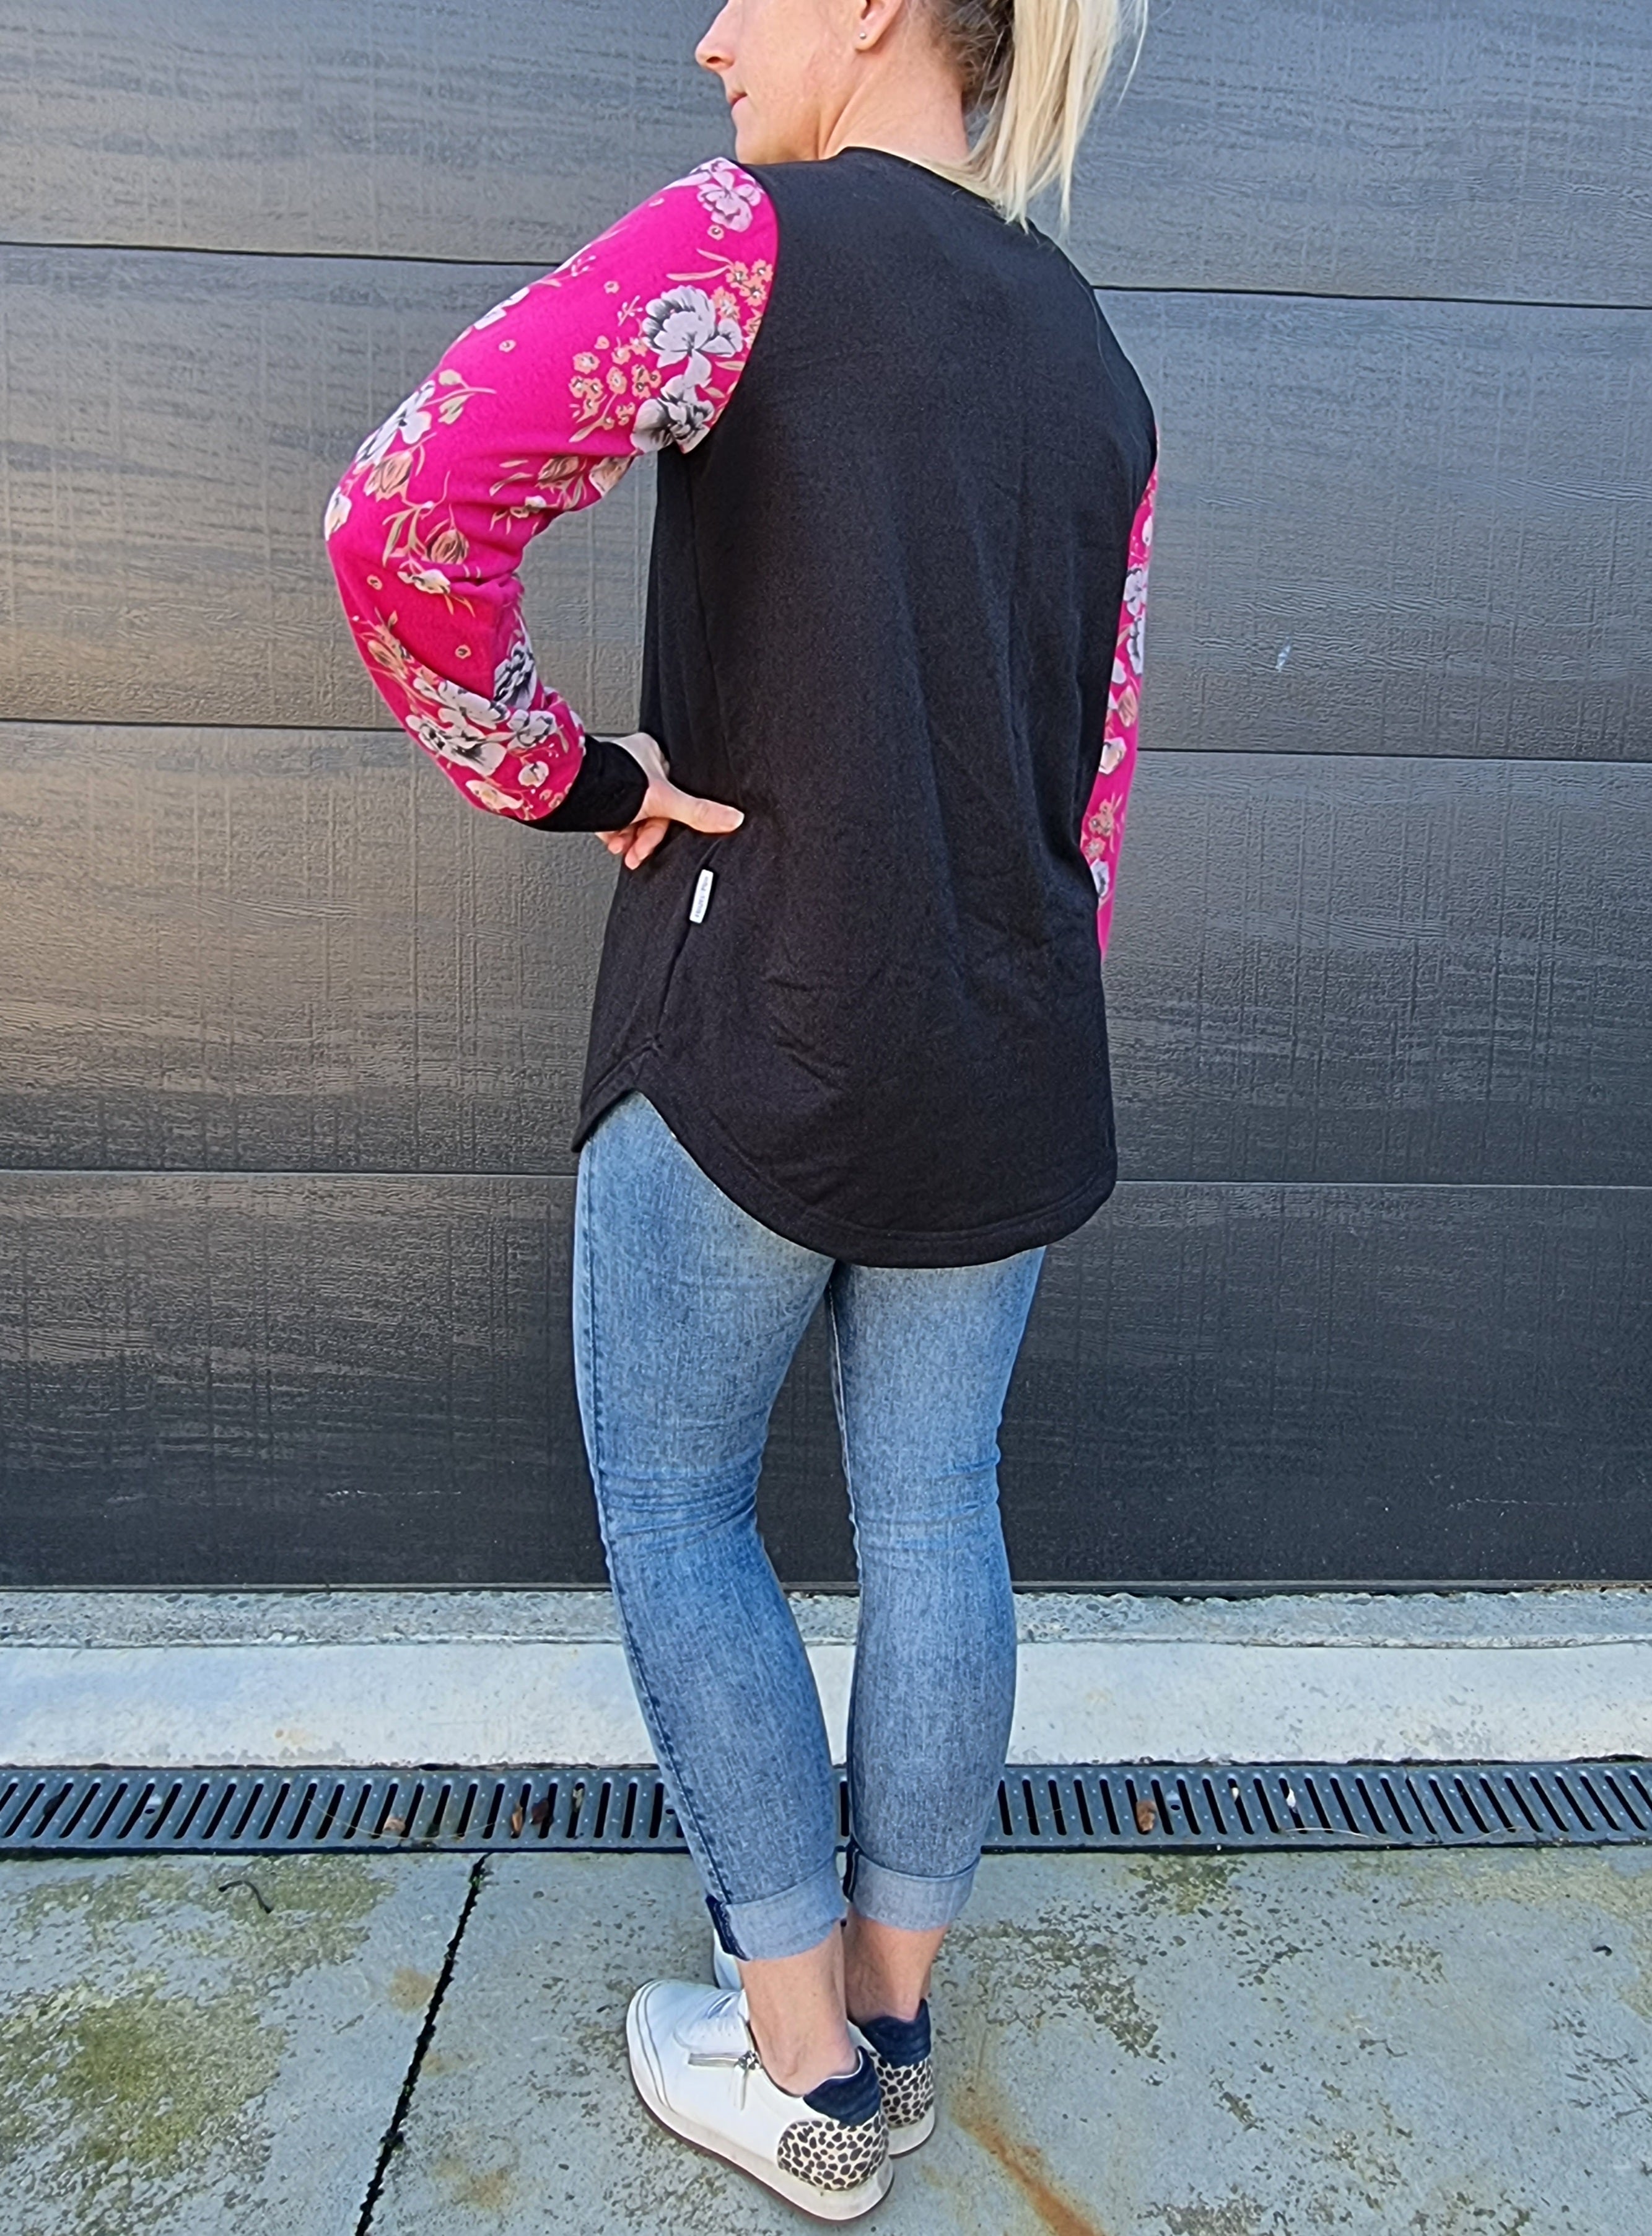 May sweat - Black/hot pink floral